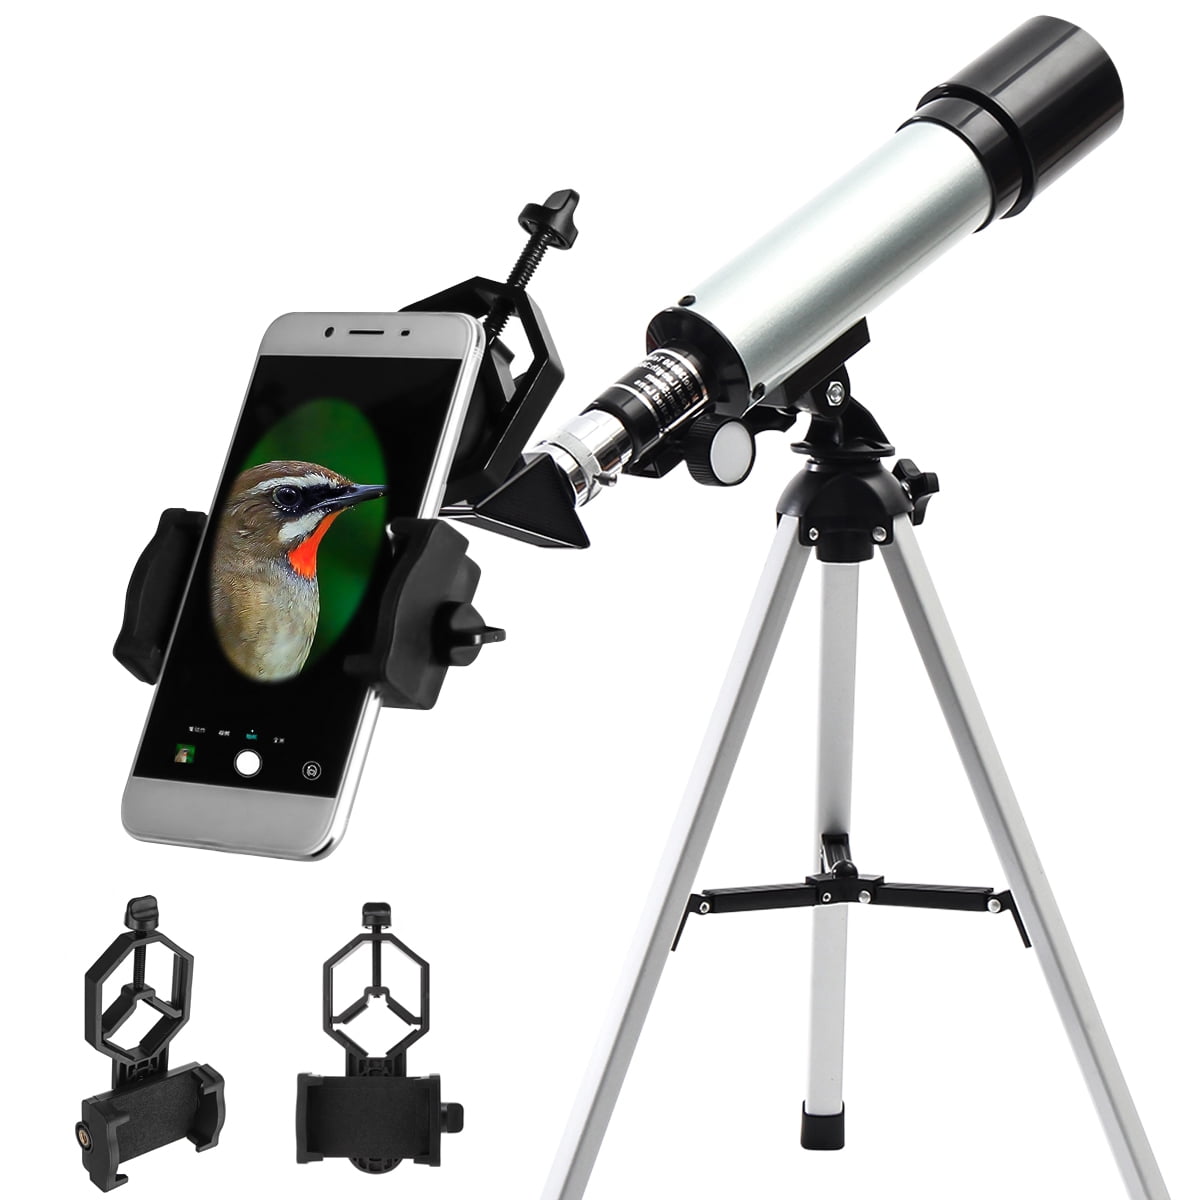 Aomekie Kids Telescope for Astronomy Beginners Refracter Telescopes with Gift Case and Tripod Gift for Kids Educational Beginners